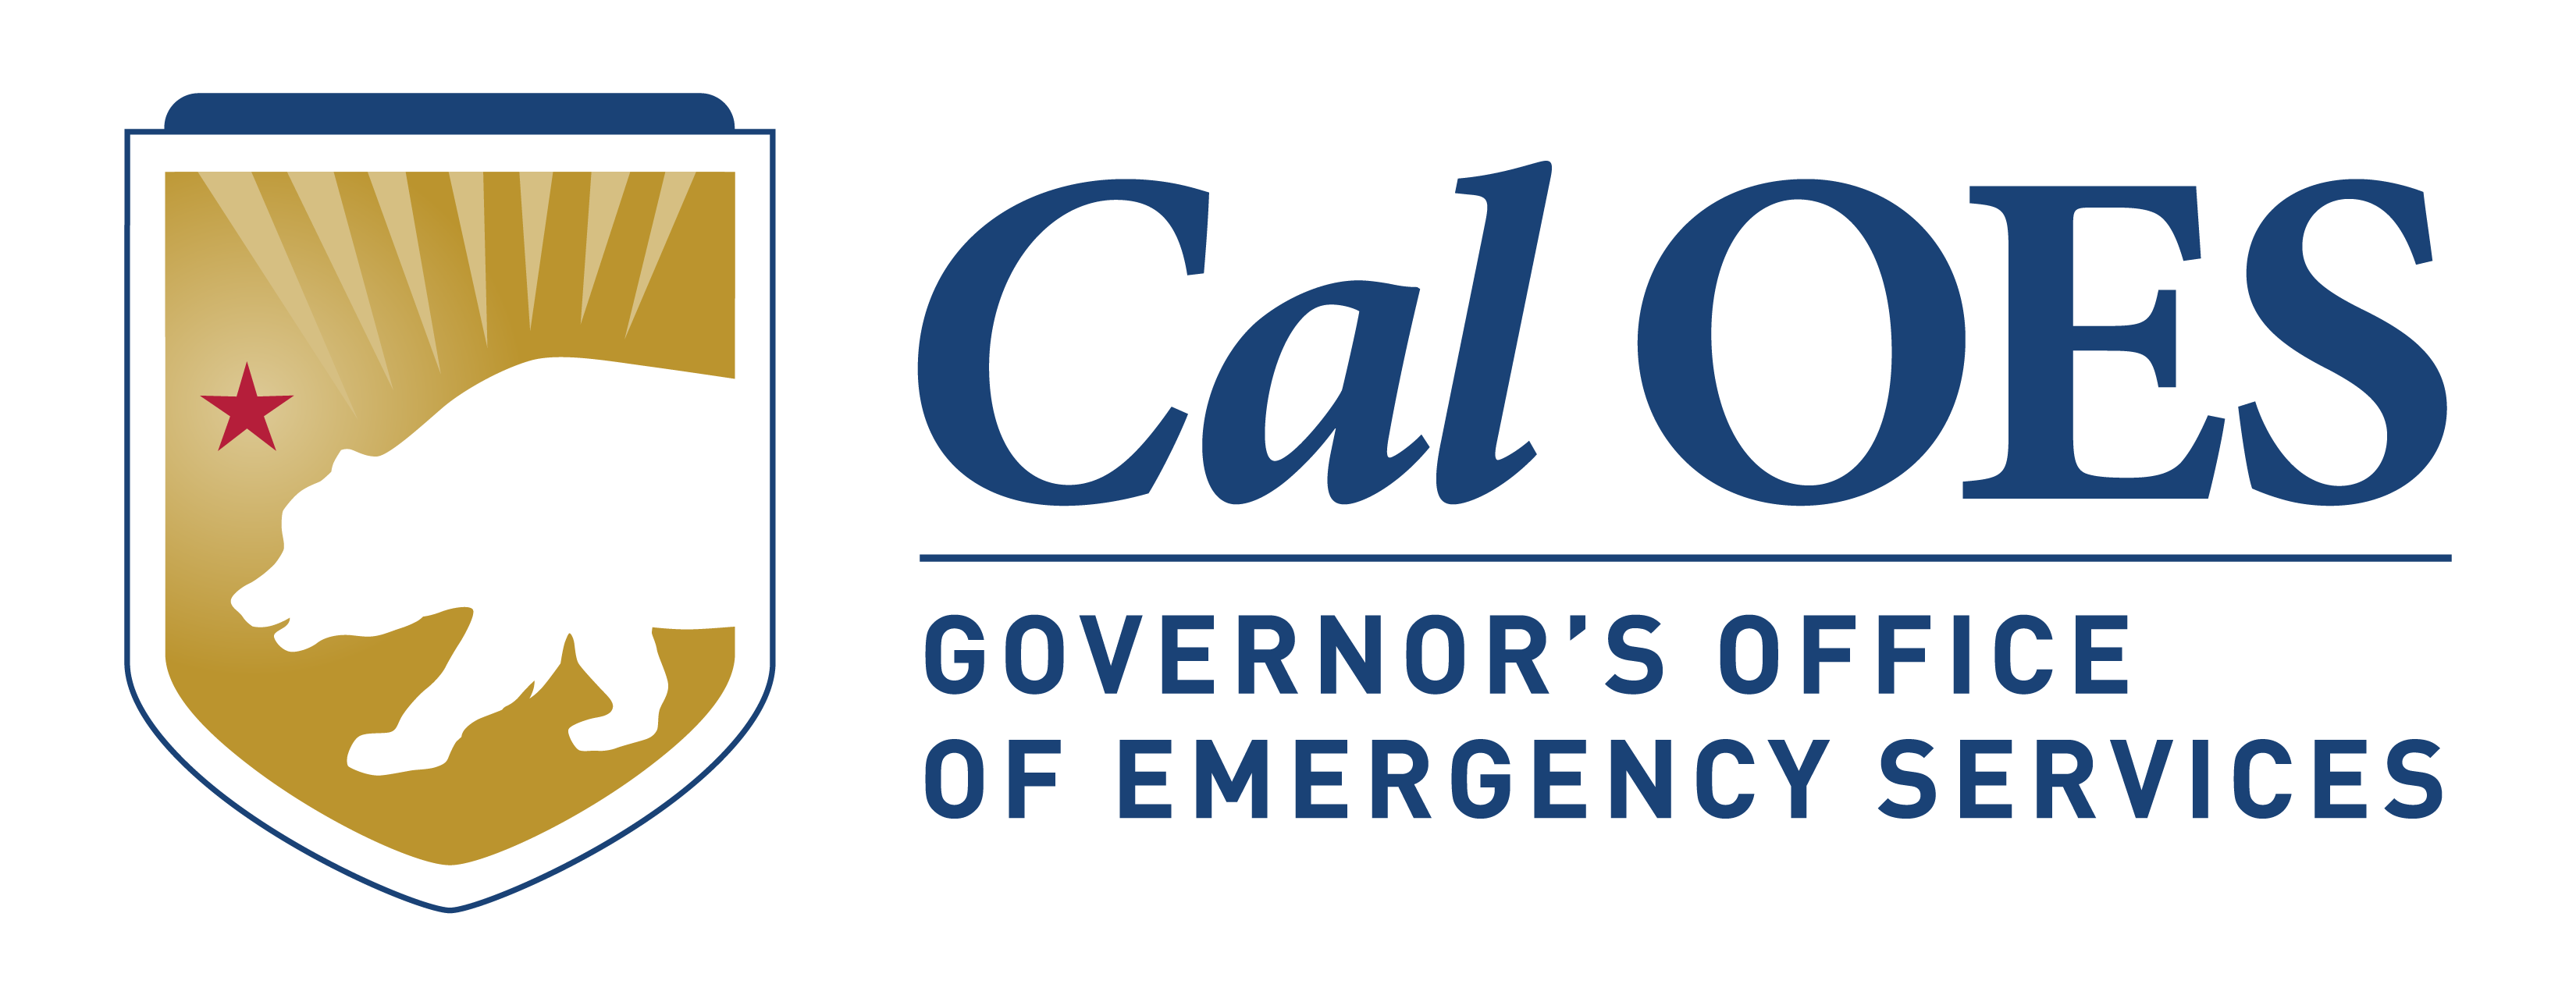 California Governor's Office of Emergency Services logo